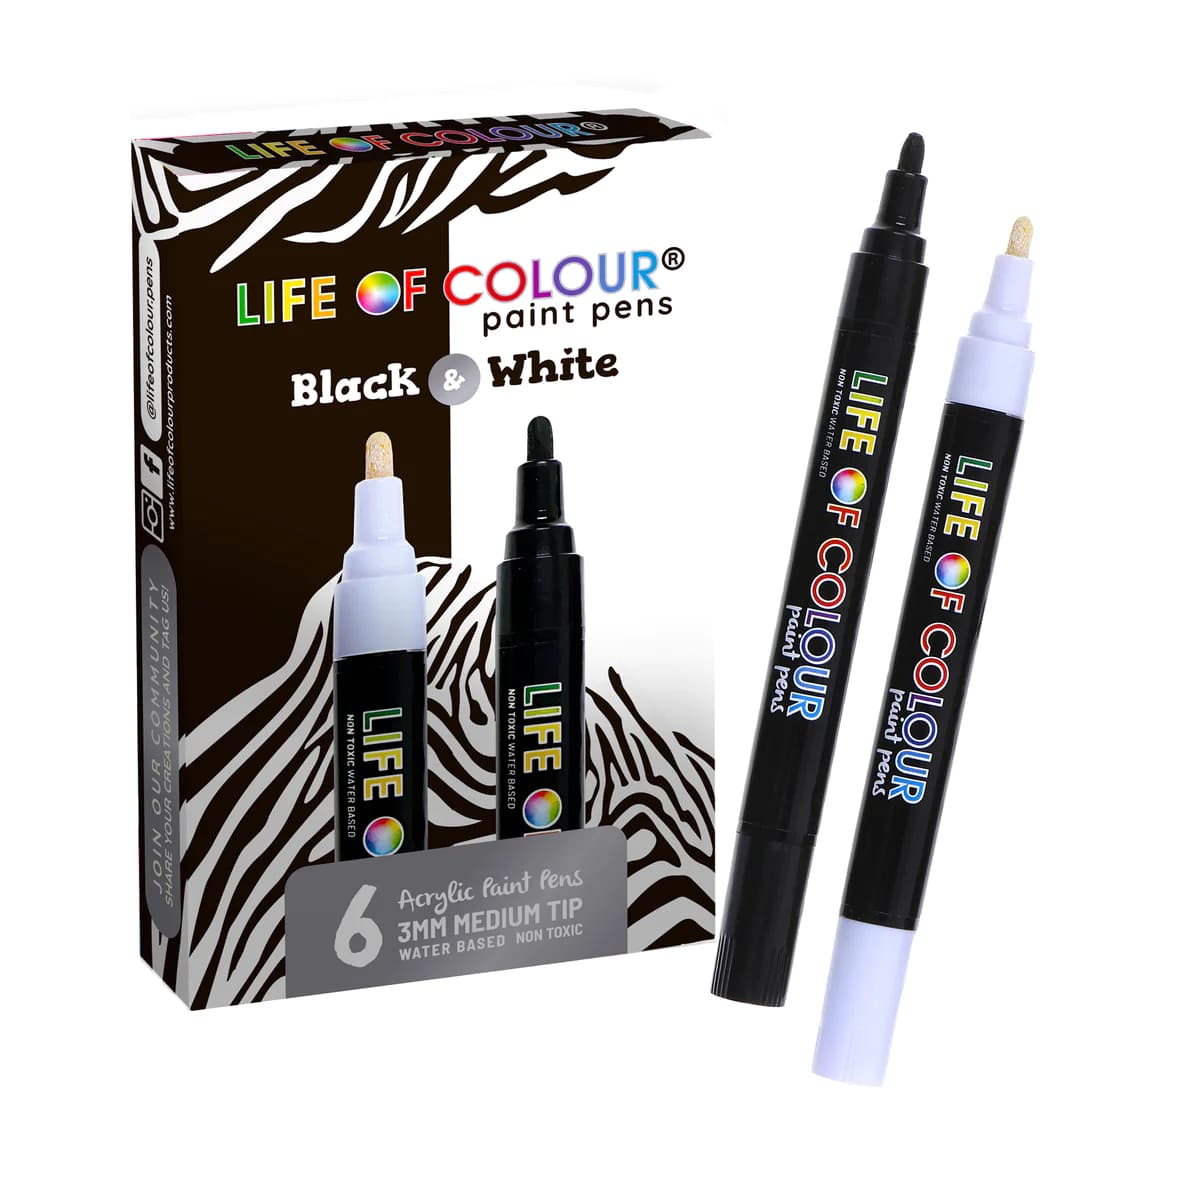 Life of Colour Black and White 3mm Medium Tip Acrylic Paint Pens